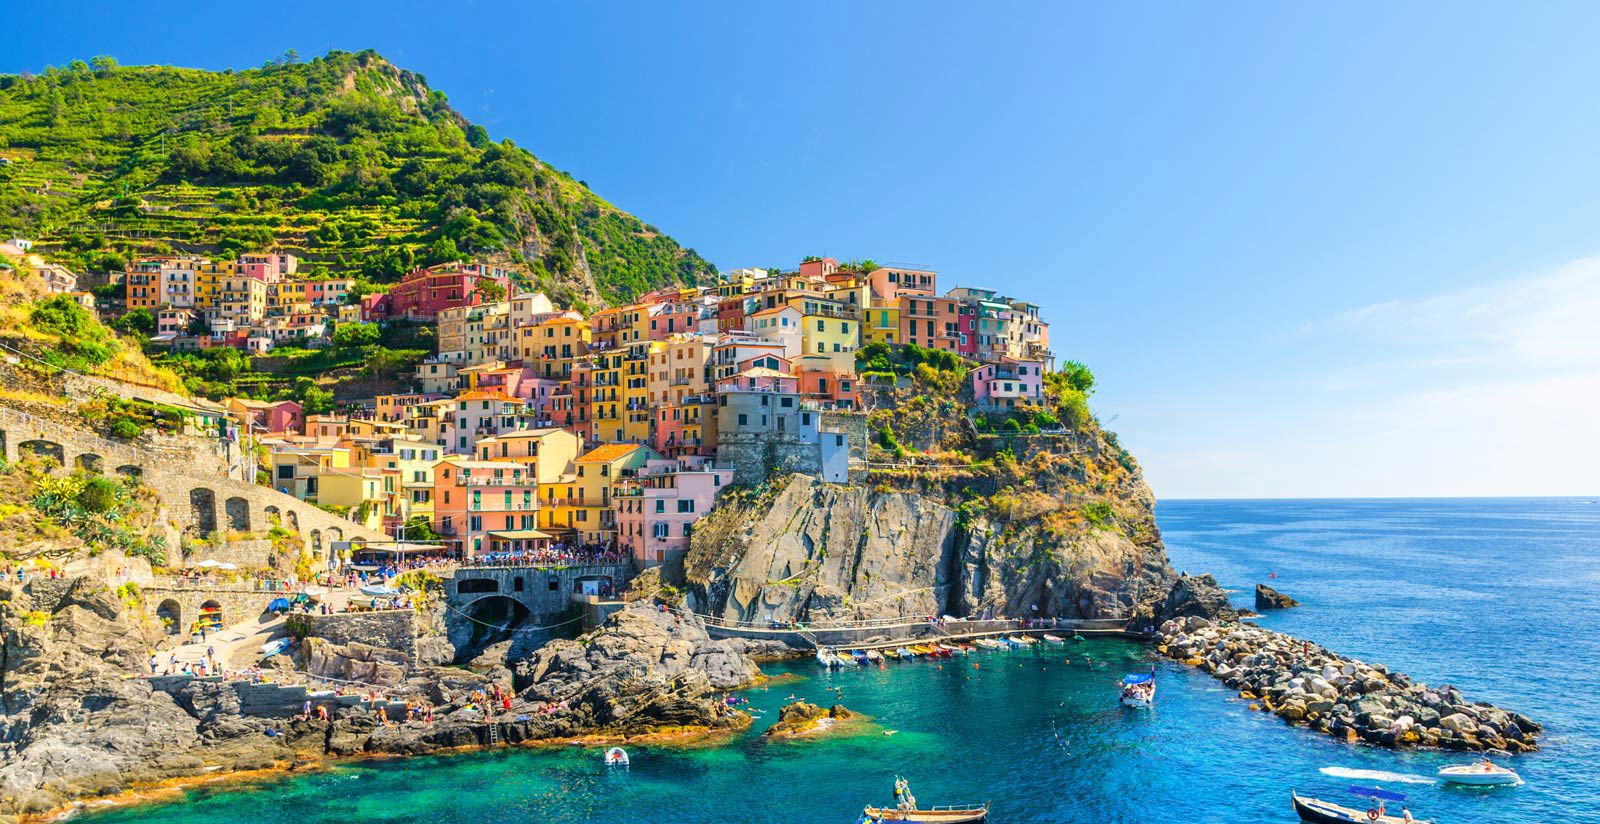 Le Cinque Terre and the Gulf of Poets 2